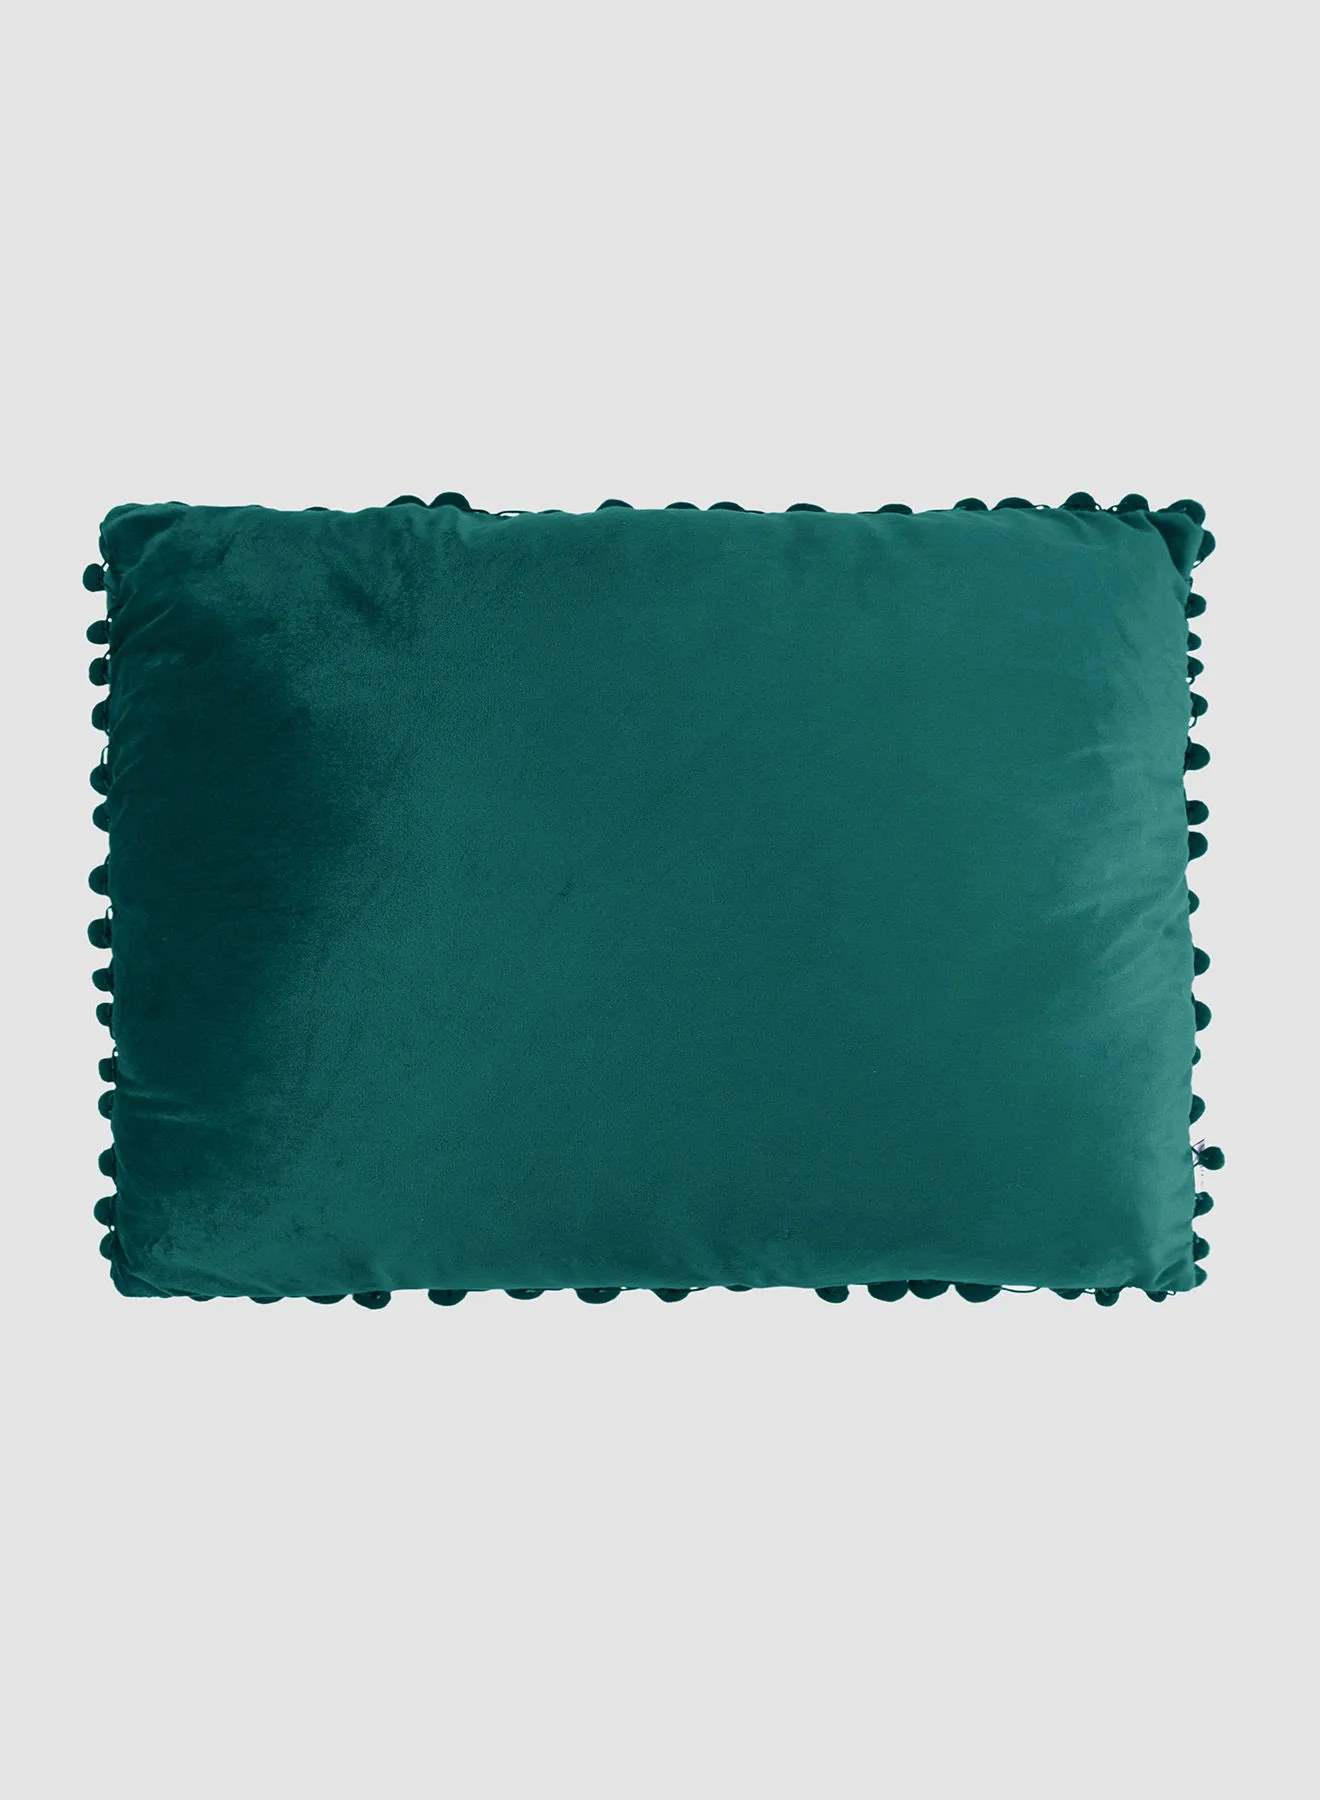 Switch Velvet Cushion  with Pom-poms, Unique Luxury Quality Decor Items for the Perfect Stylish Home Green 30 x 50cm